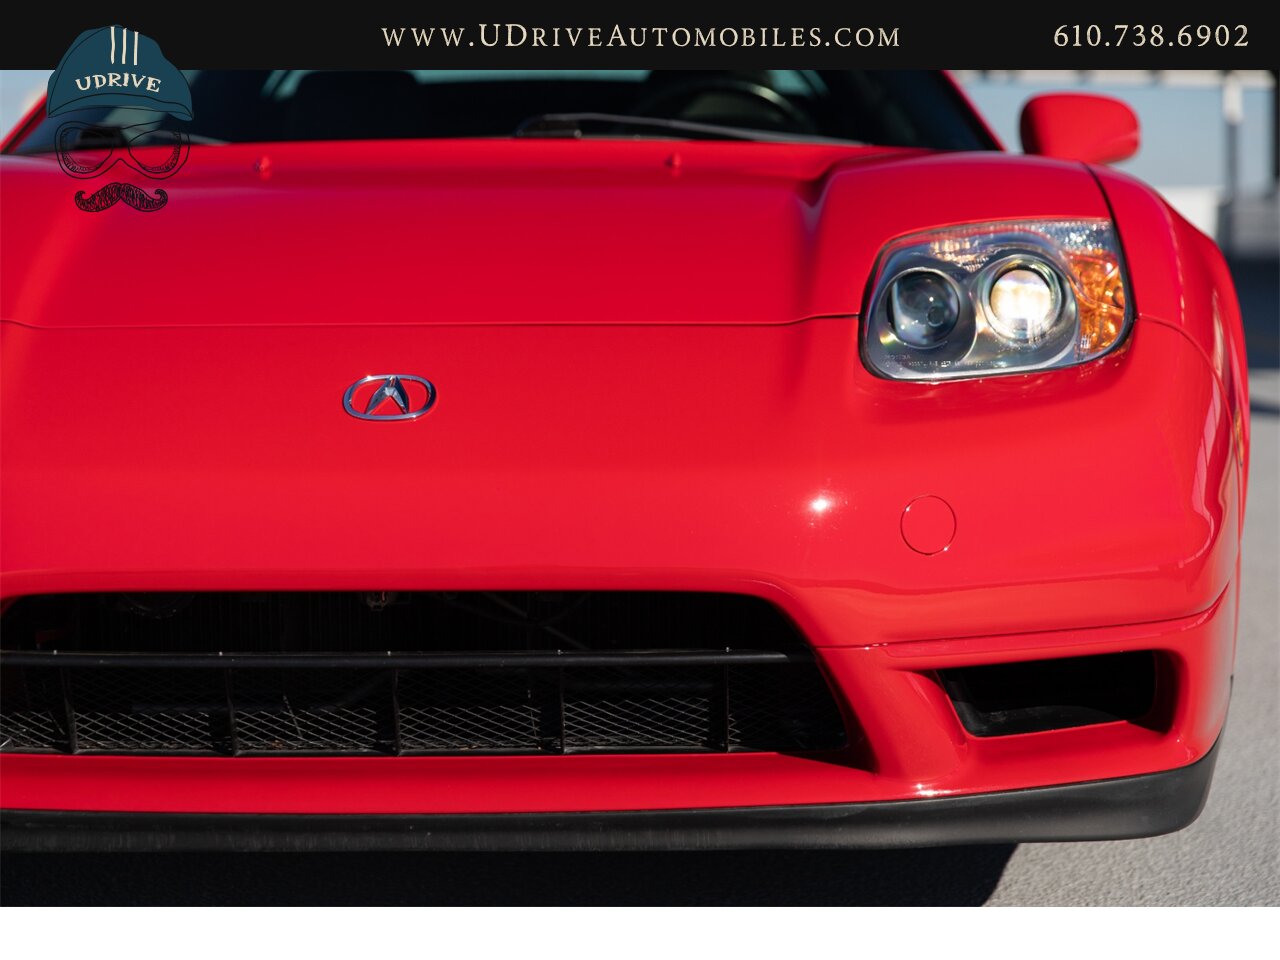 2004 Acura NSX NSX-T 21k mIles Red over Black  Fresh Timing Belt Service - Photo 11 - West Chester, PA 19382